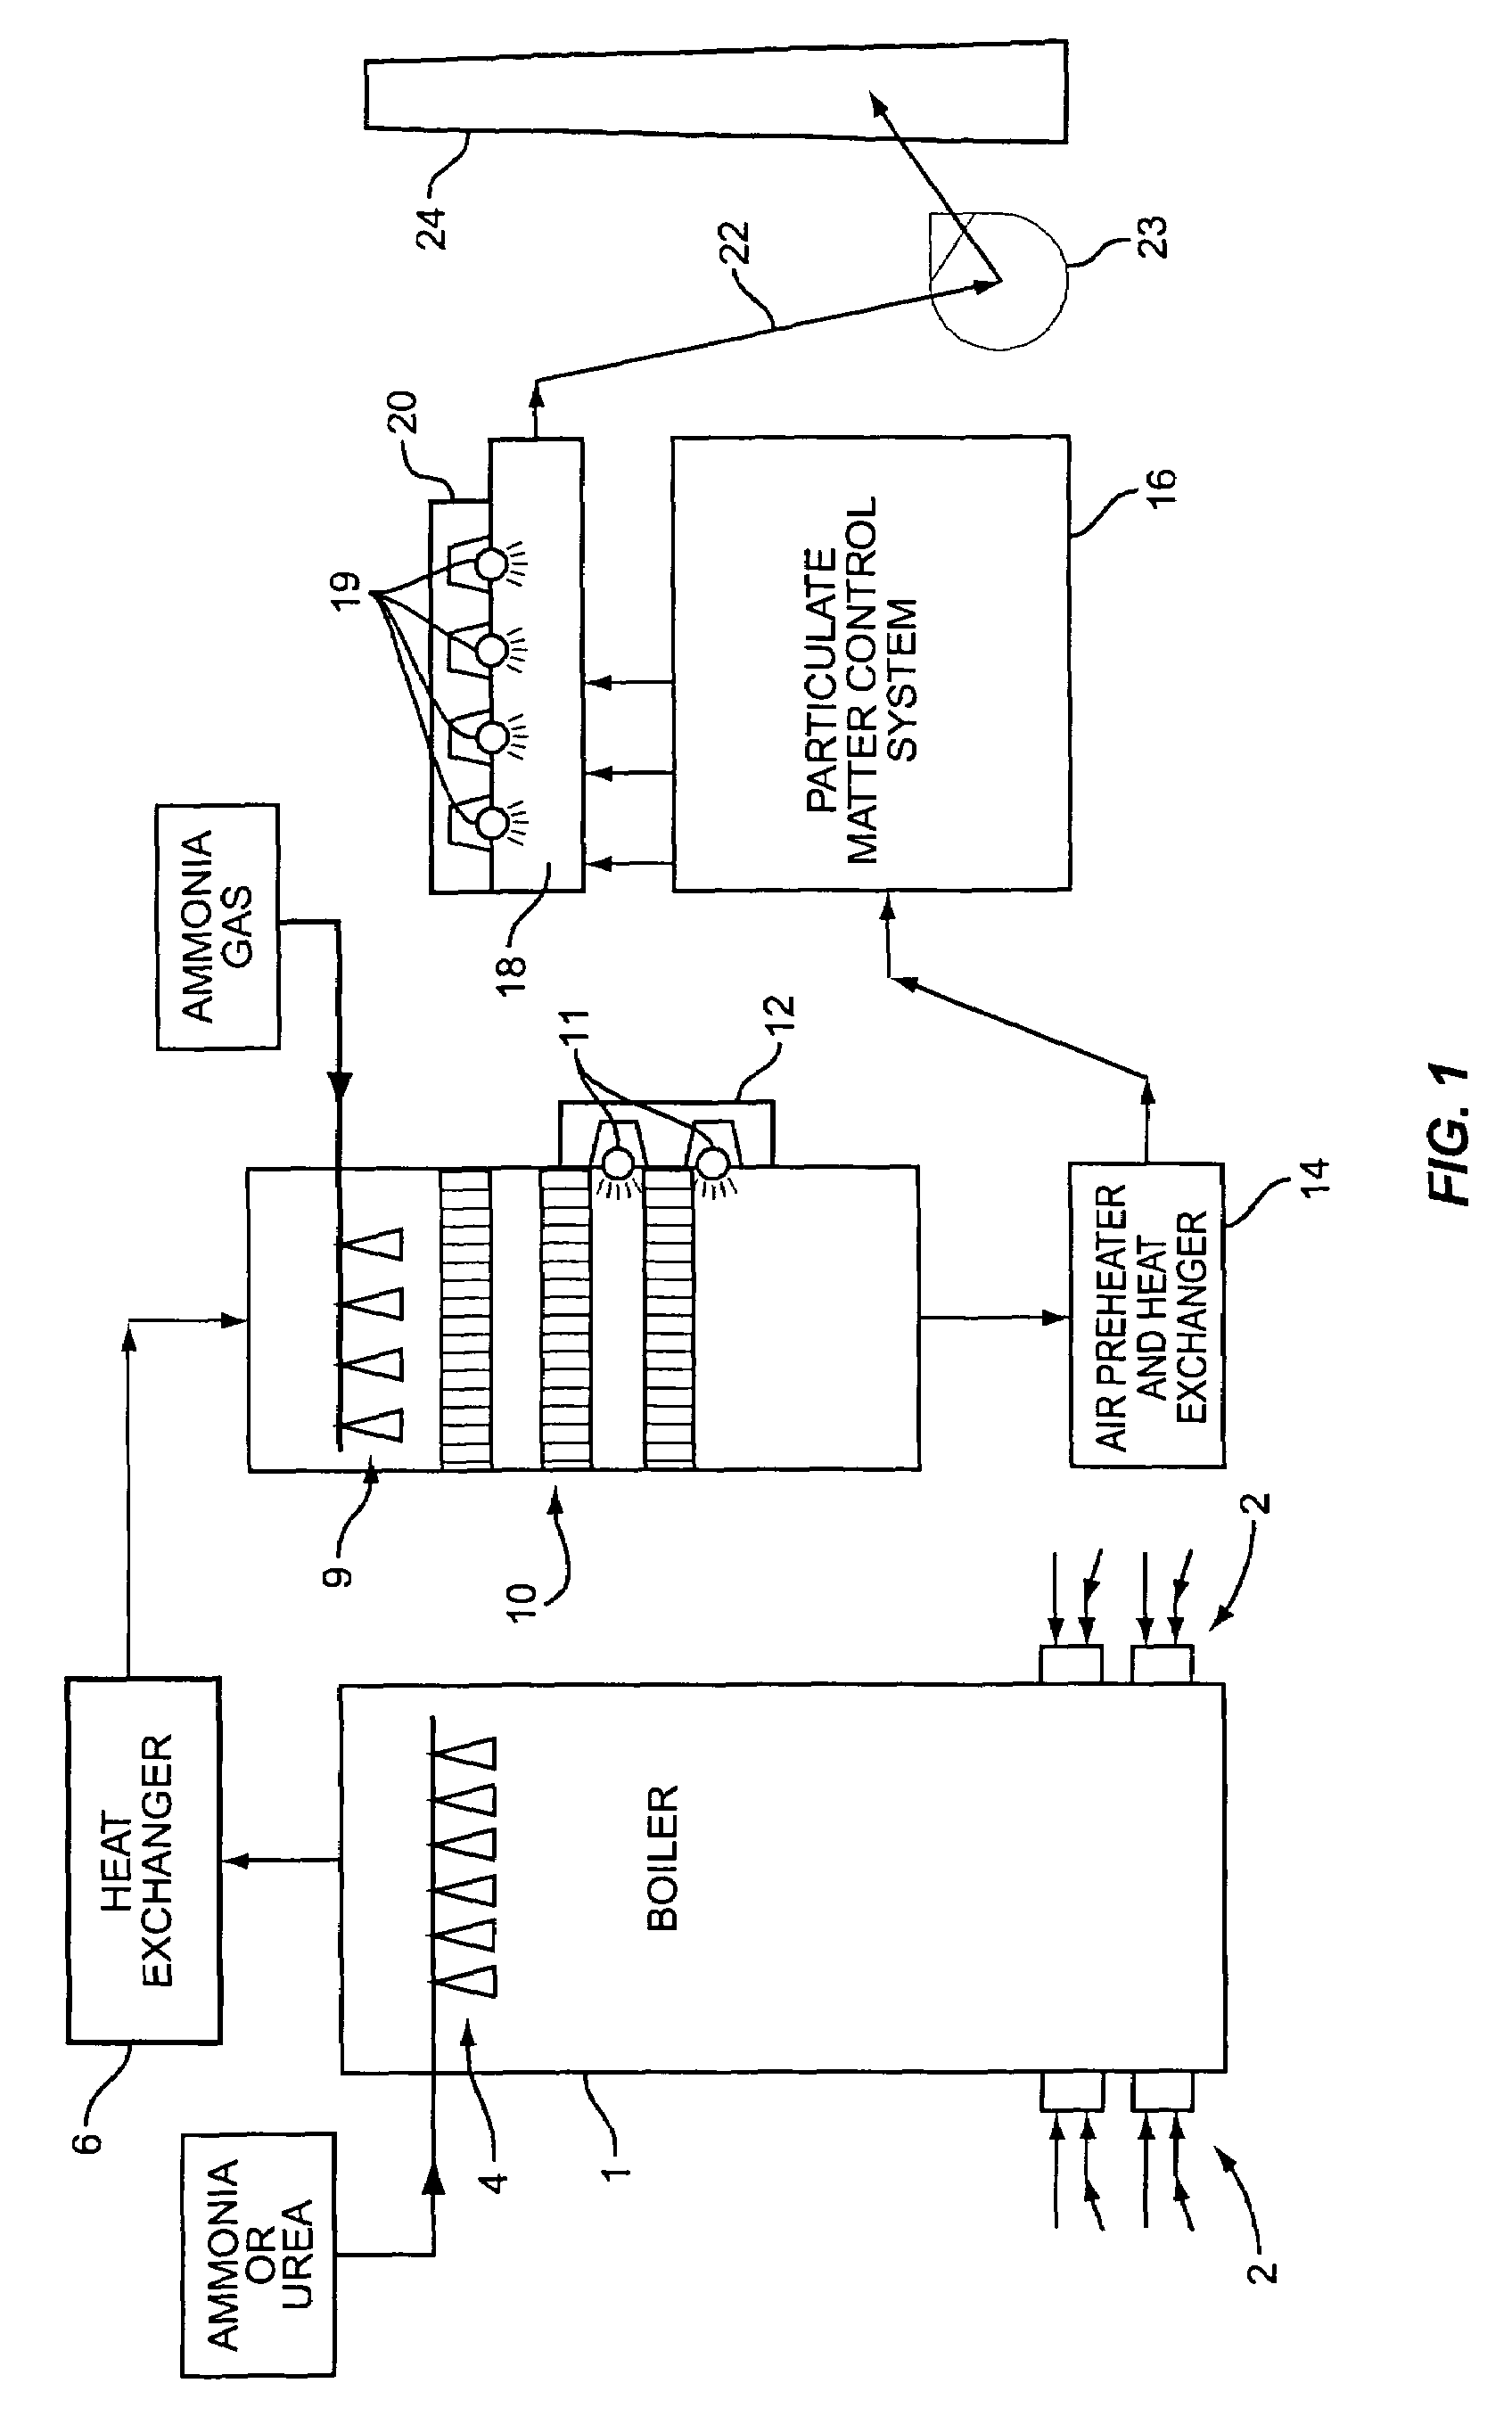 Method of photochemically removing ammonia from gas streams